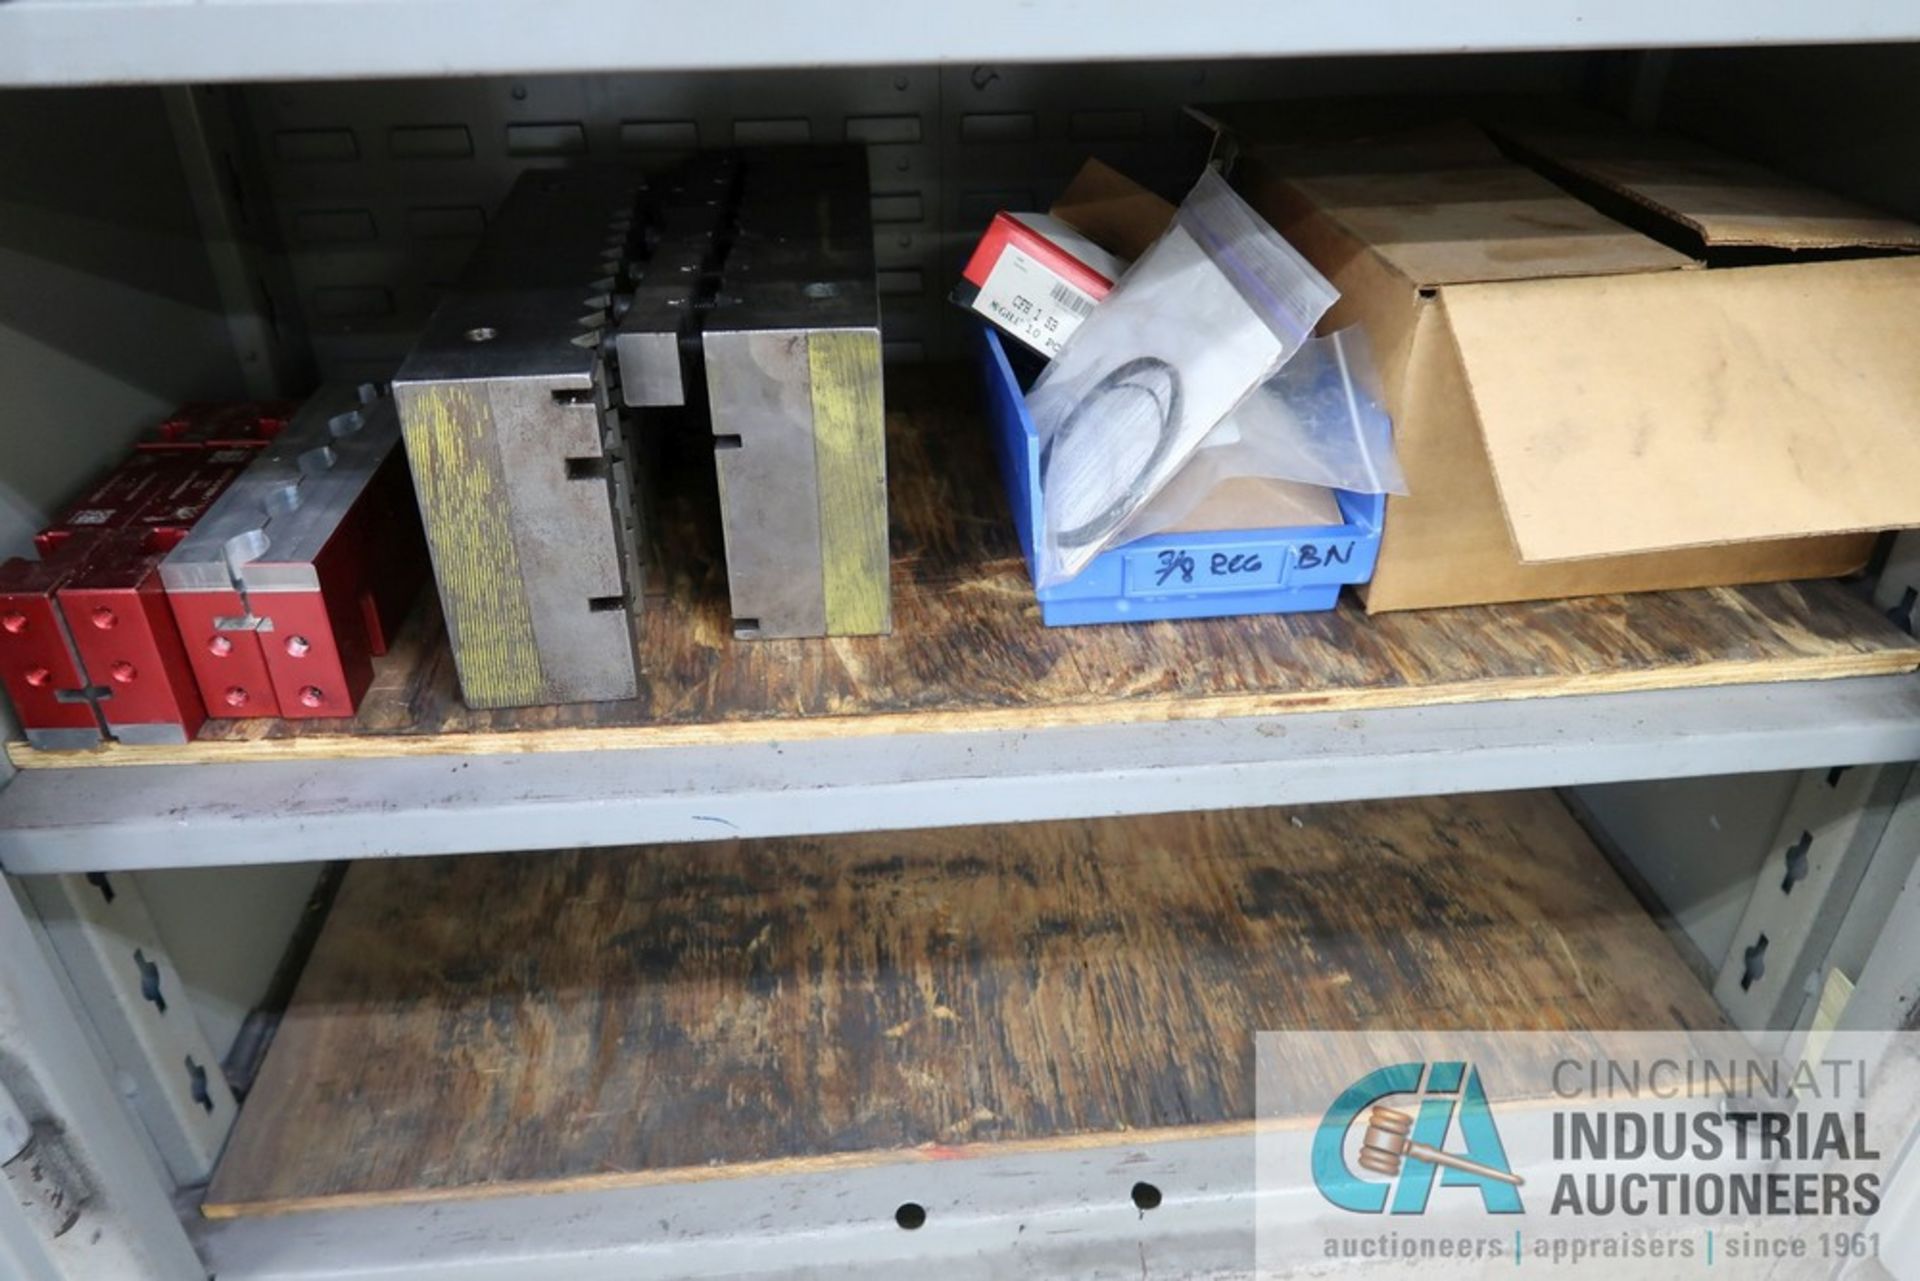 (LOT) MISCELLANEOUS MACHINE ACCESSORIES AND SHOP EQUIPMENT WITH LYON STORAGE CABINET - Image 5 of 5